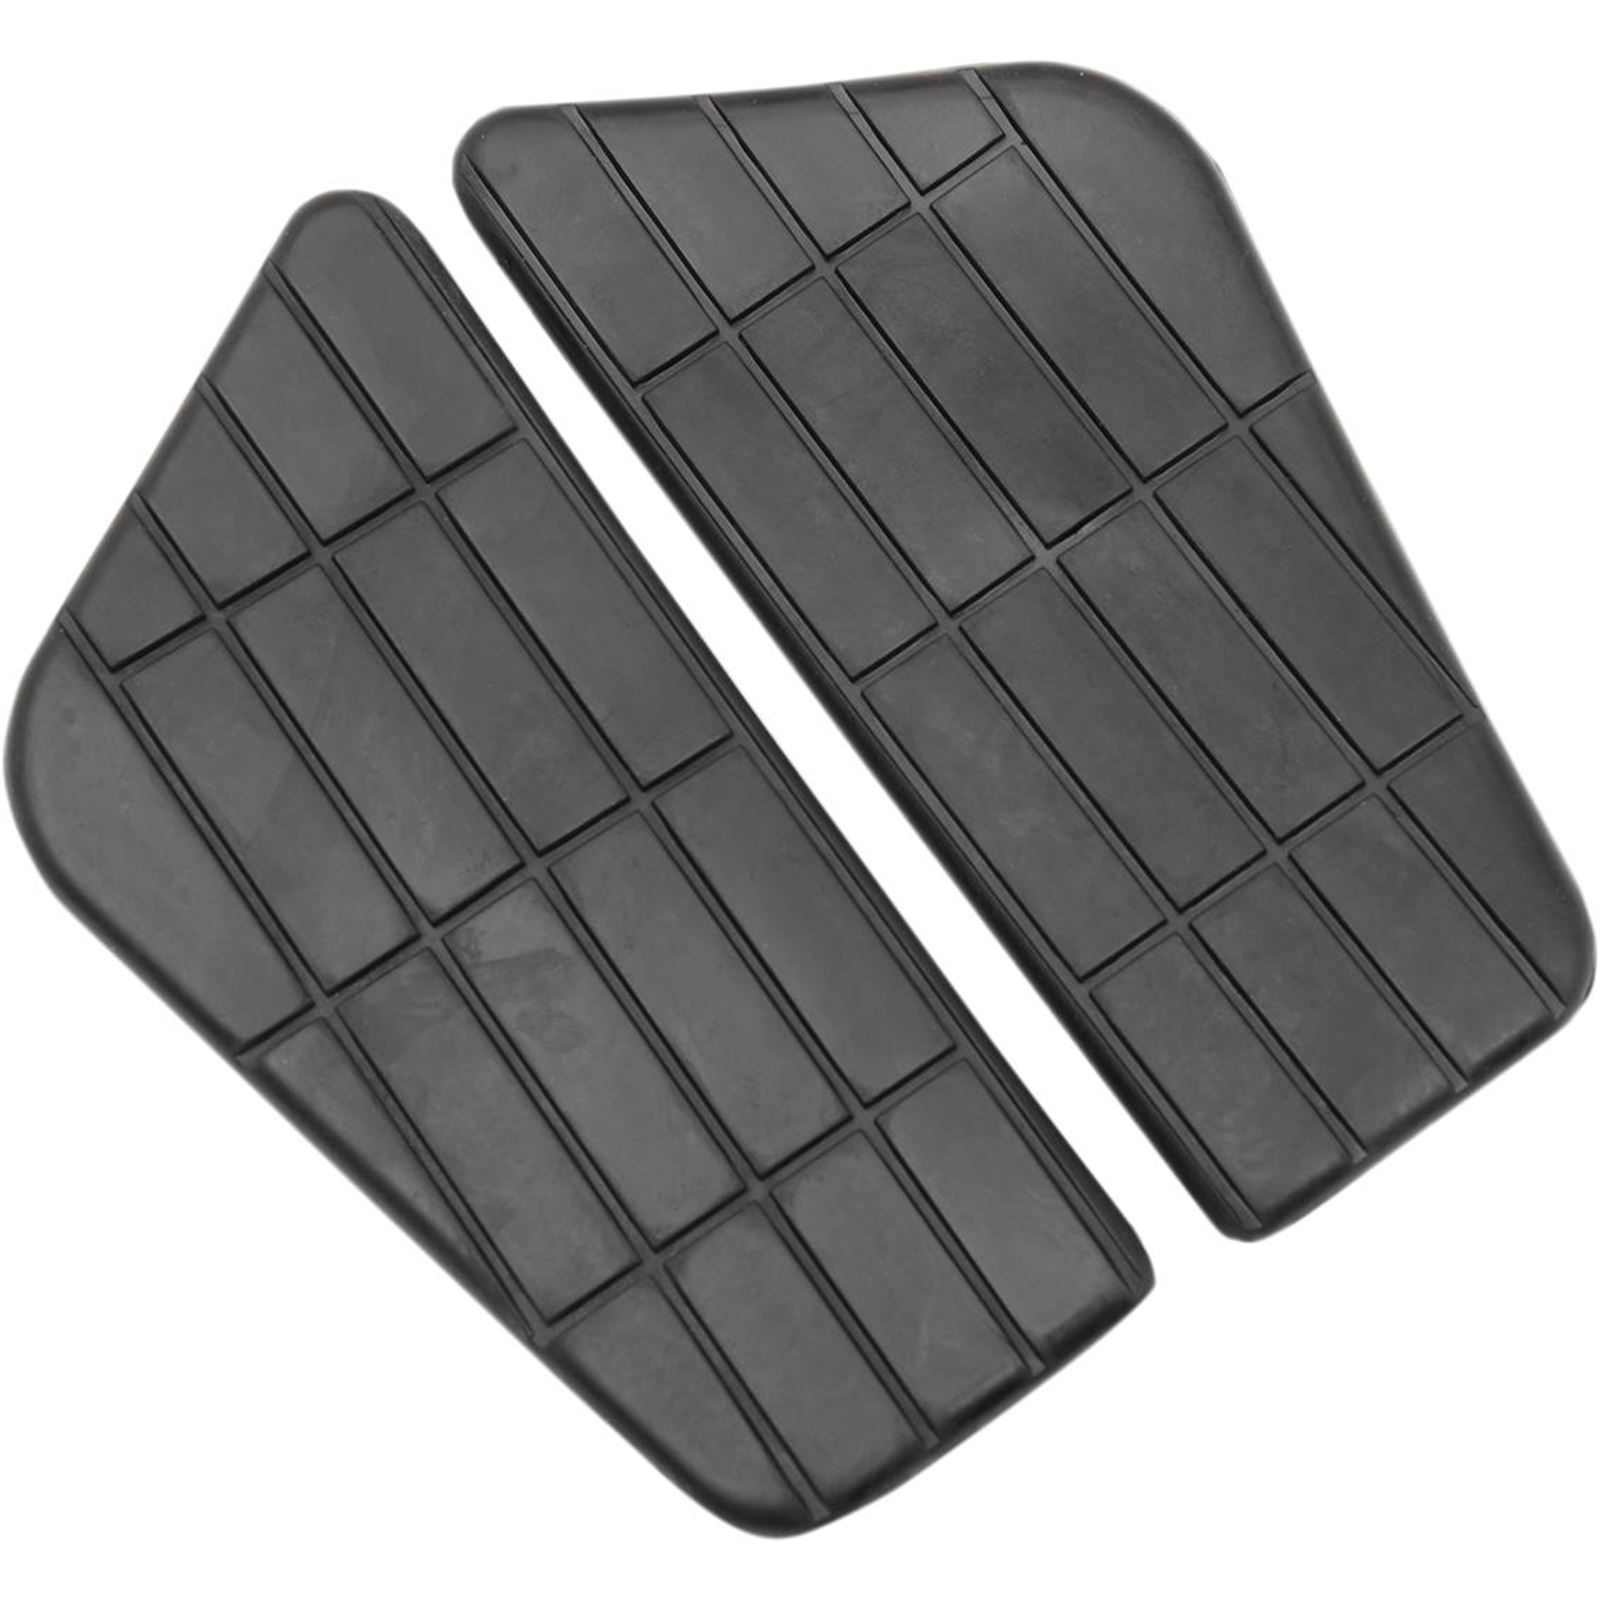 Parts Unlimited Offset Engine-Guard Cruise Board Rubber Pads